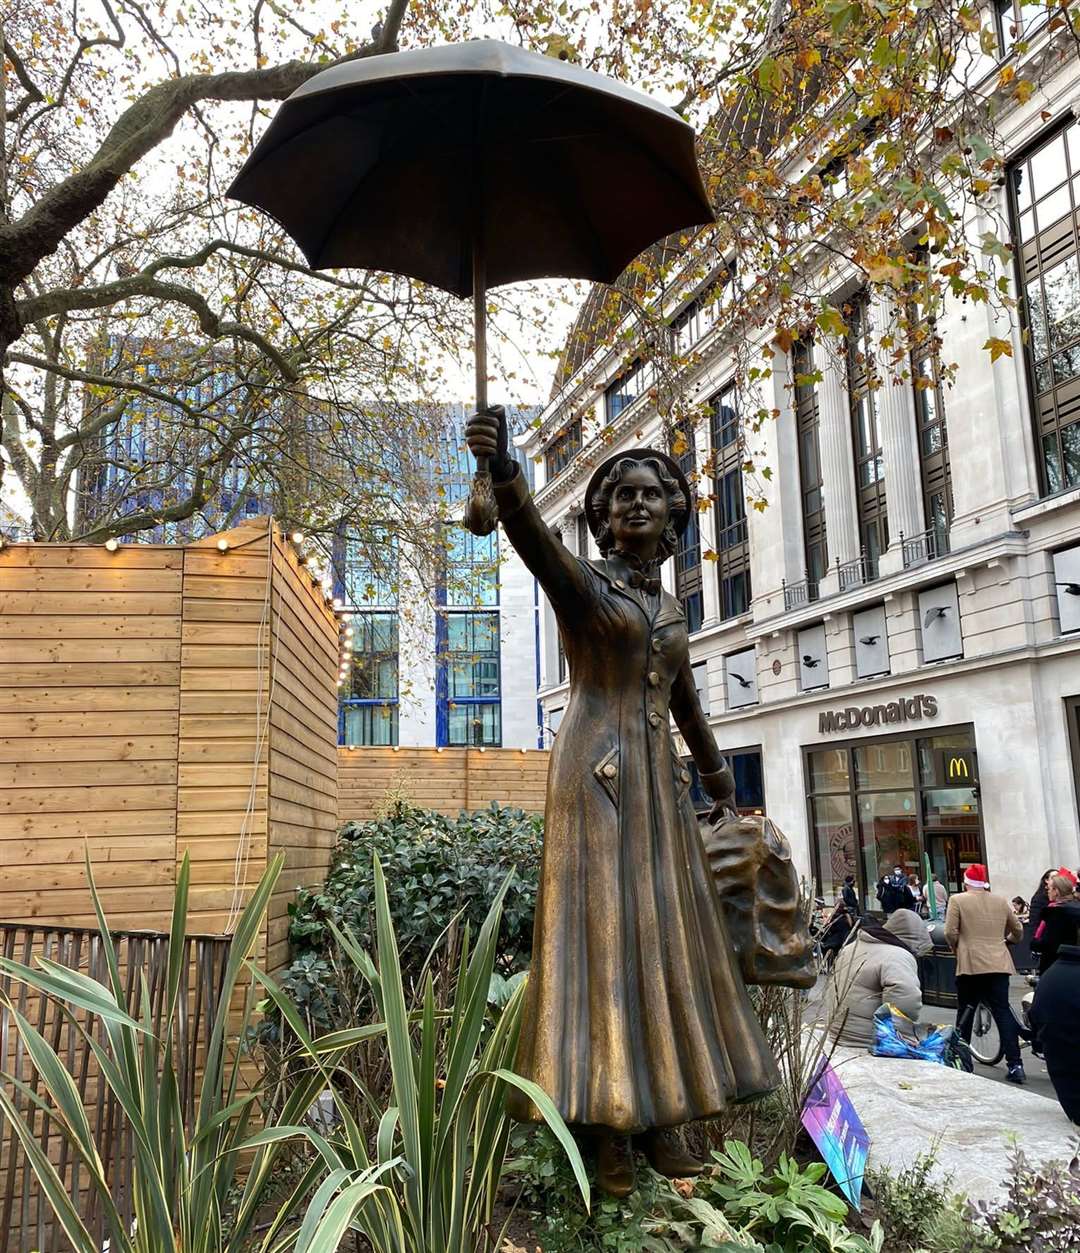 Mary Poppins was one of the 'Scenes on the Square'